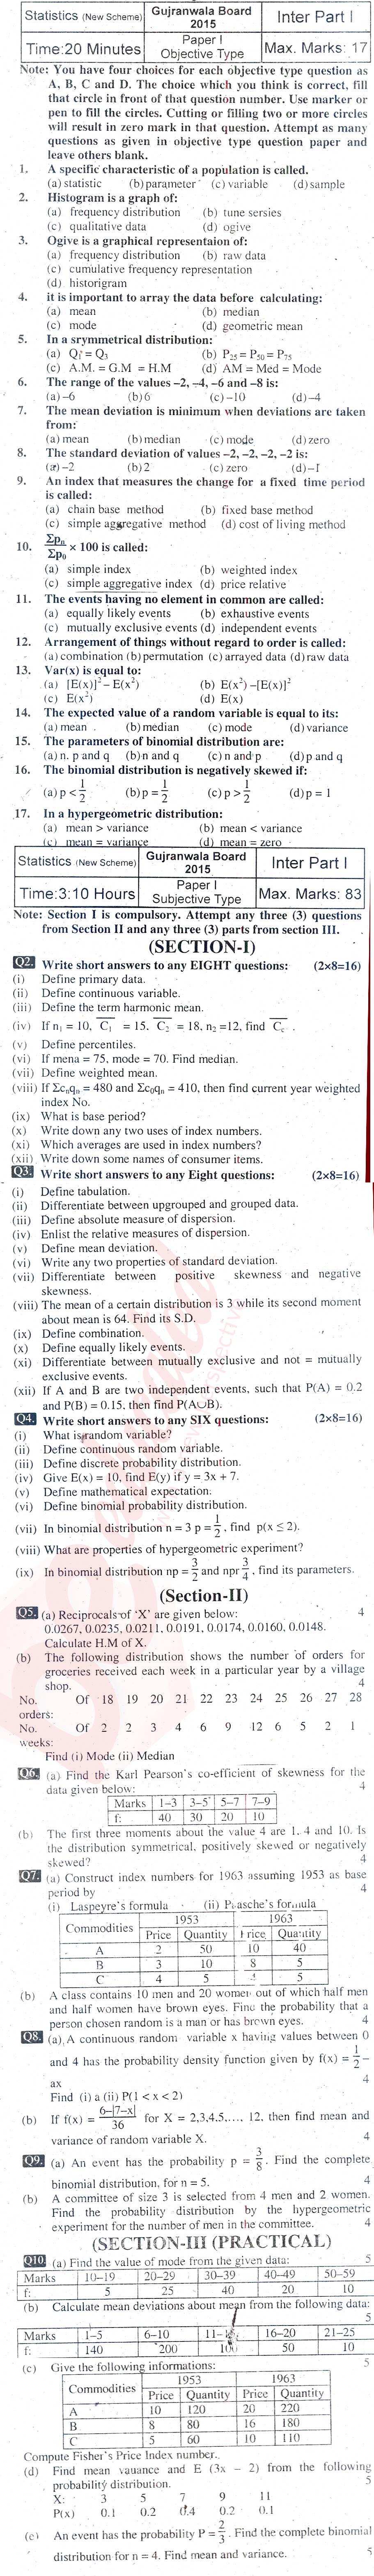 Statistics 11th class Past Paper Group 1 BISE Gujranwala 2015